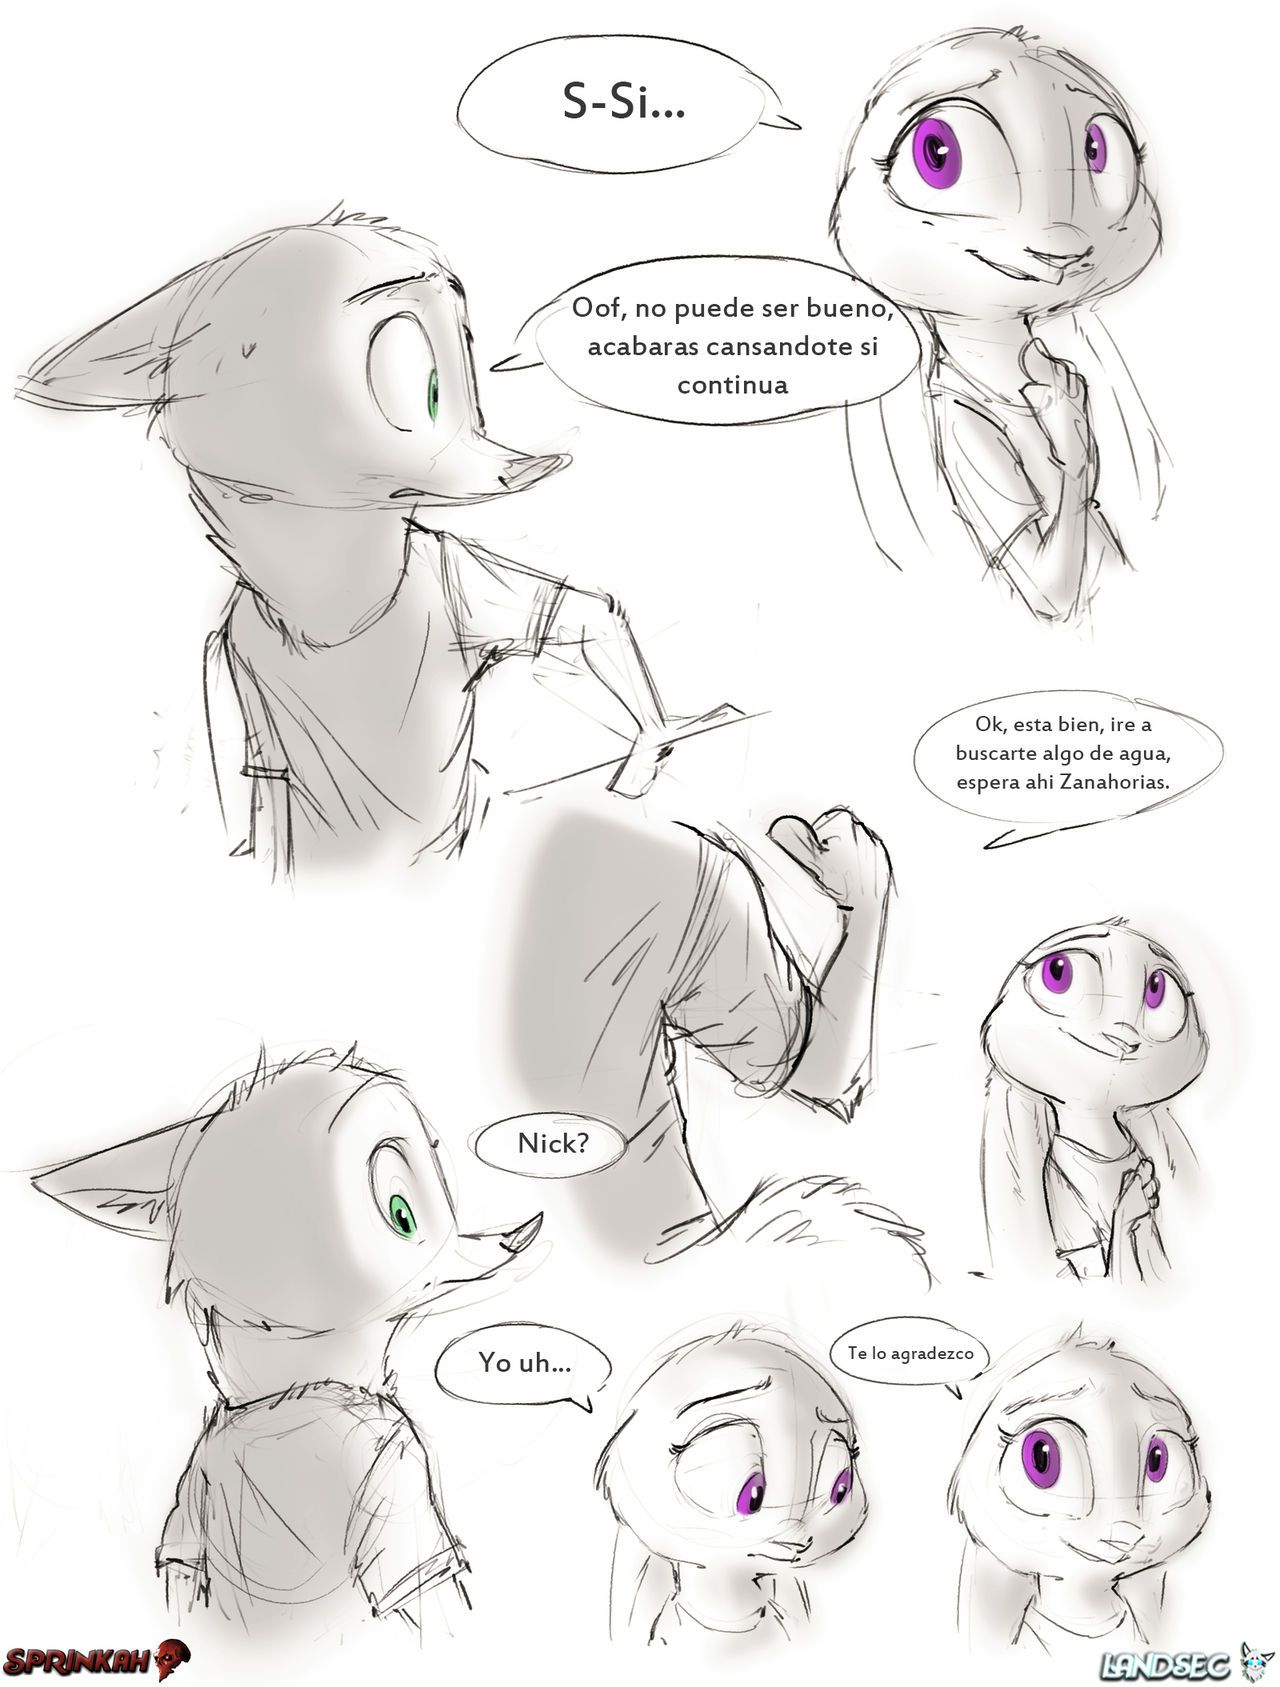 [Sprinkah] This is what true love looks like (Zootopia) (Spanish) (On Going) [Landsec] http://sprinkah.tumblr.com/ 48